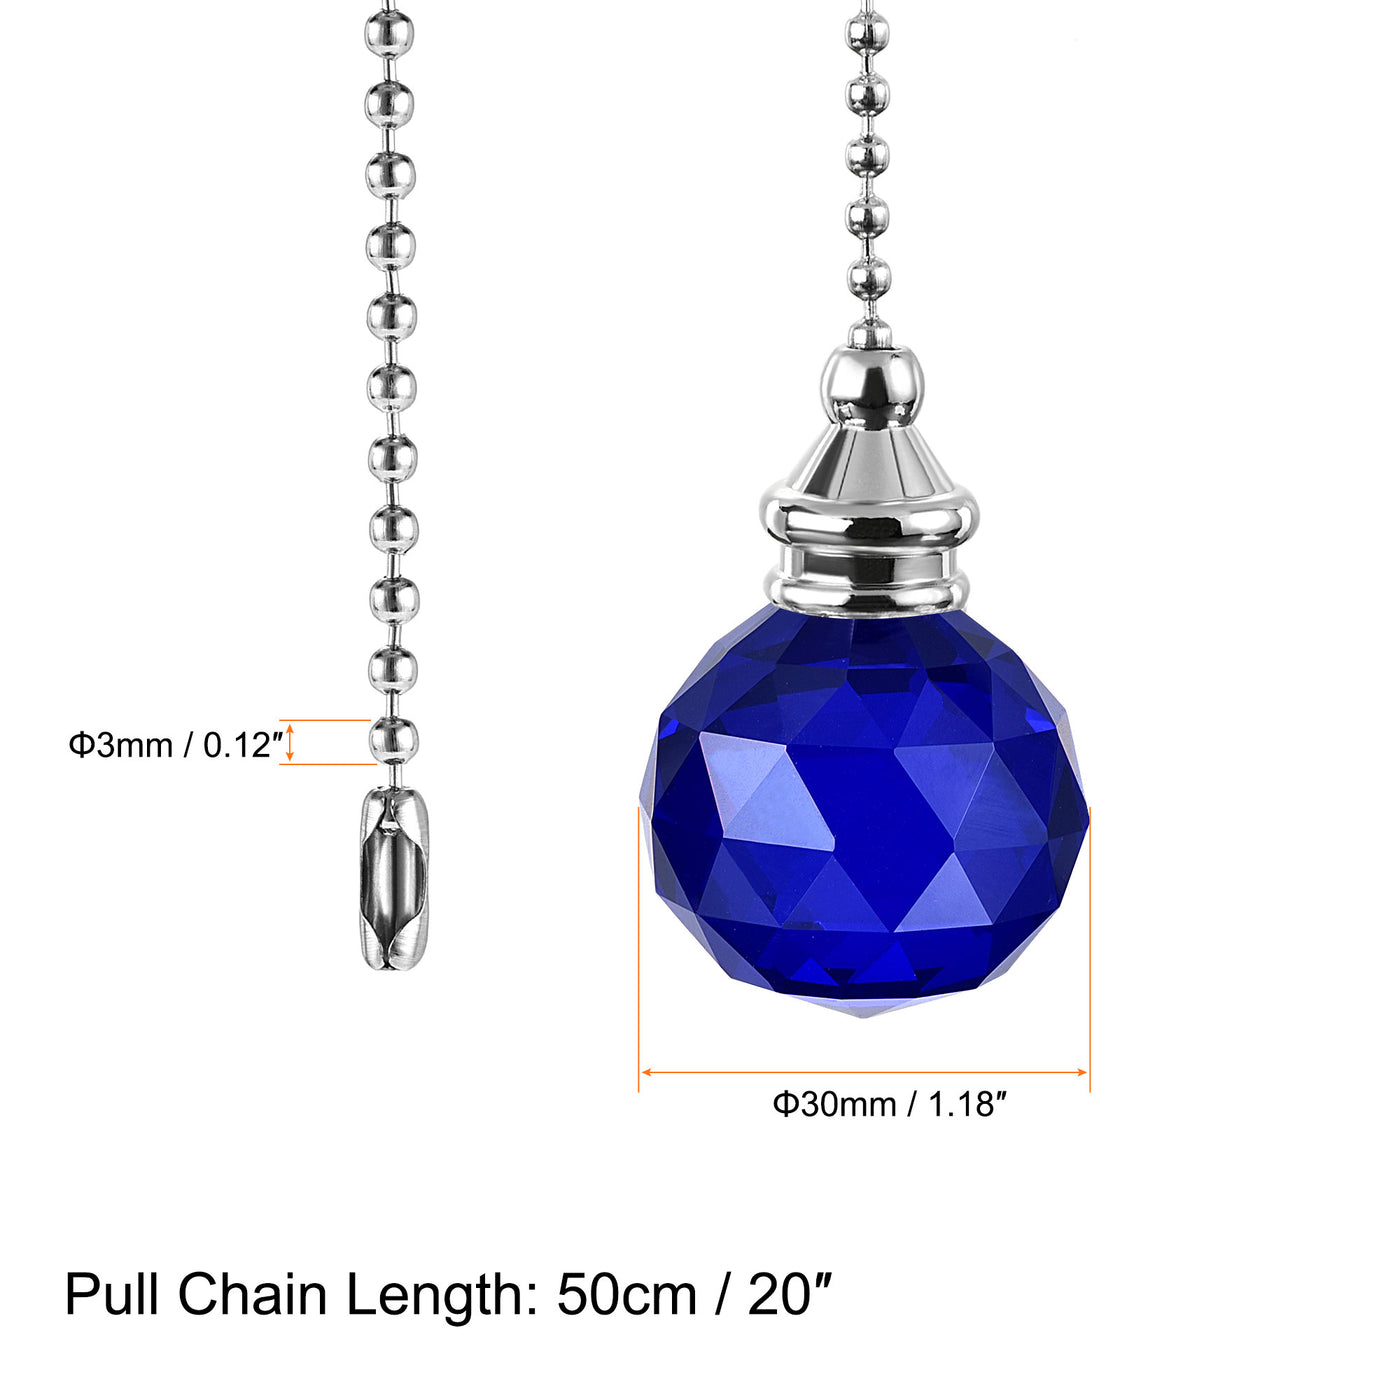 uxcell Uxcell Ceiling Fan Pull Chain, 20 Inch Nickel Finish Chain Ornament Extension, 30mm Blue Crystal Ball Pendant 2Pcs